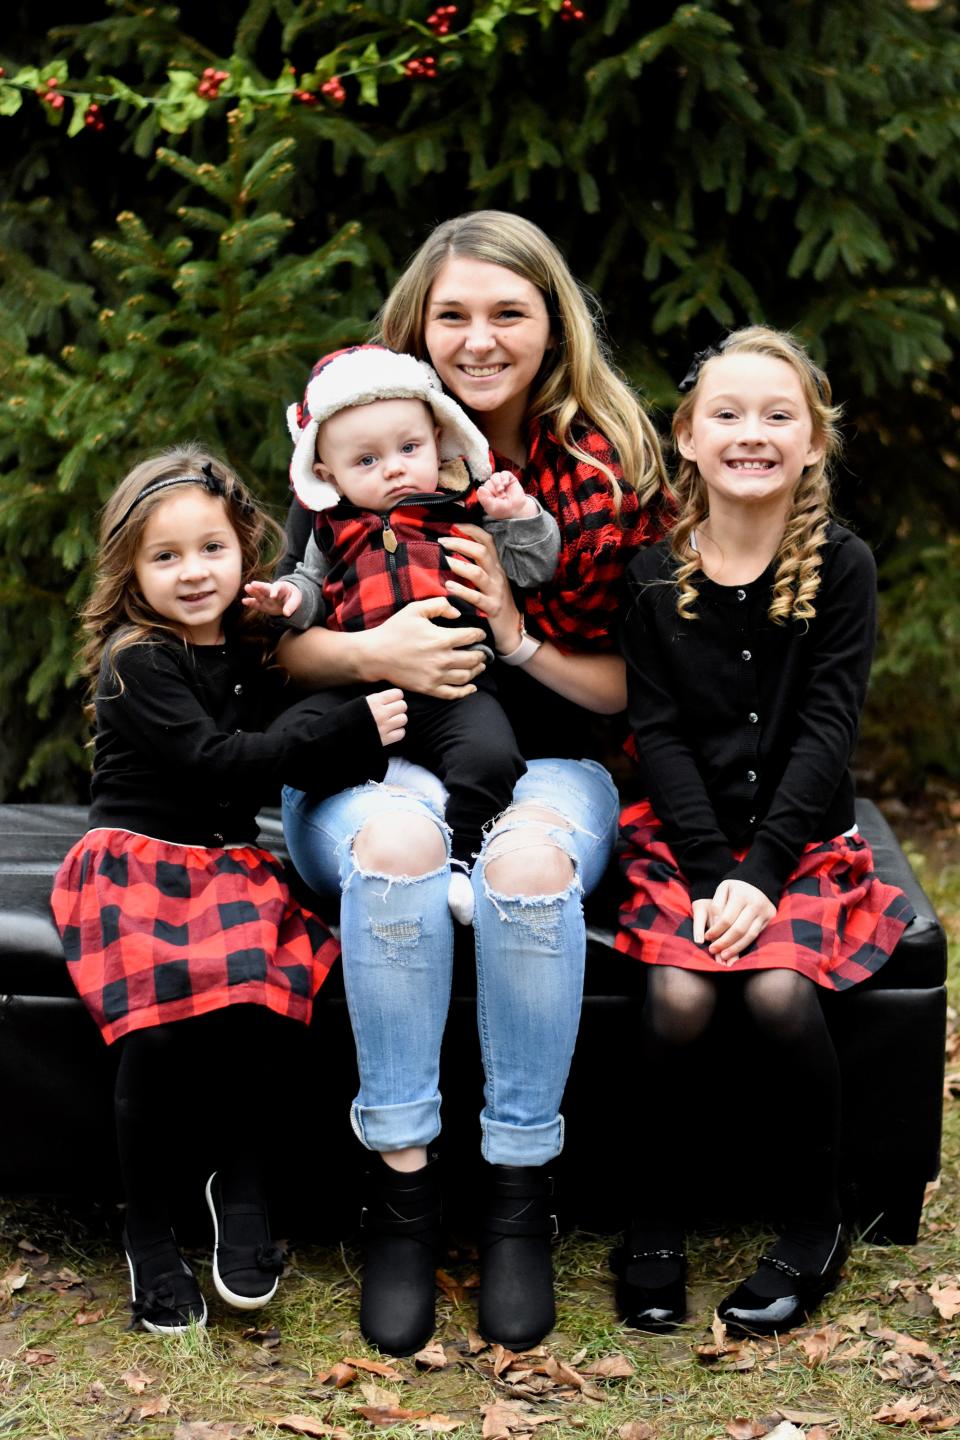 Submitted photo of Courtney Smith and her children.